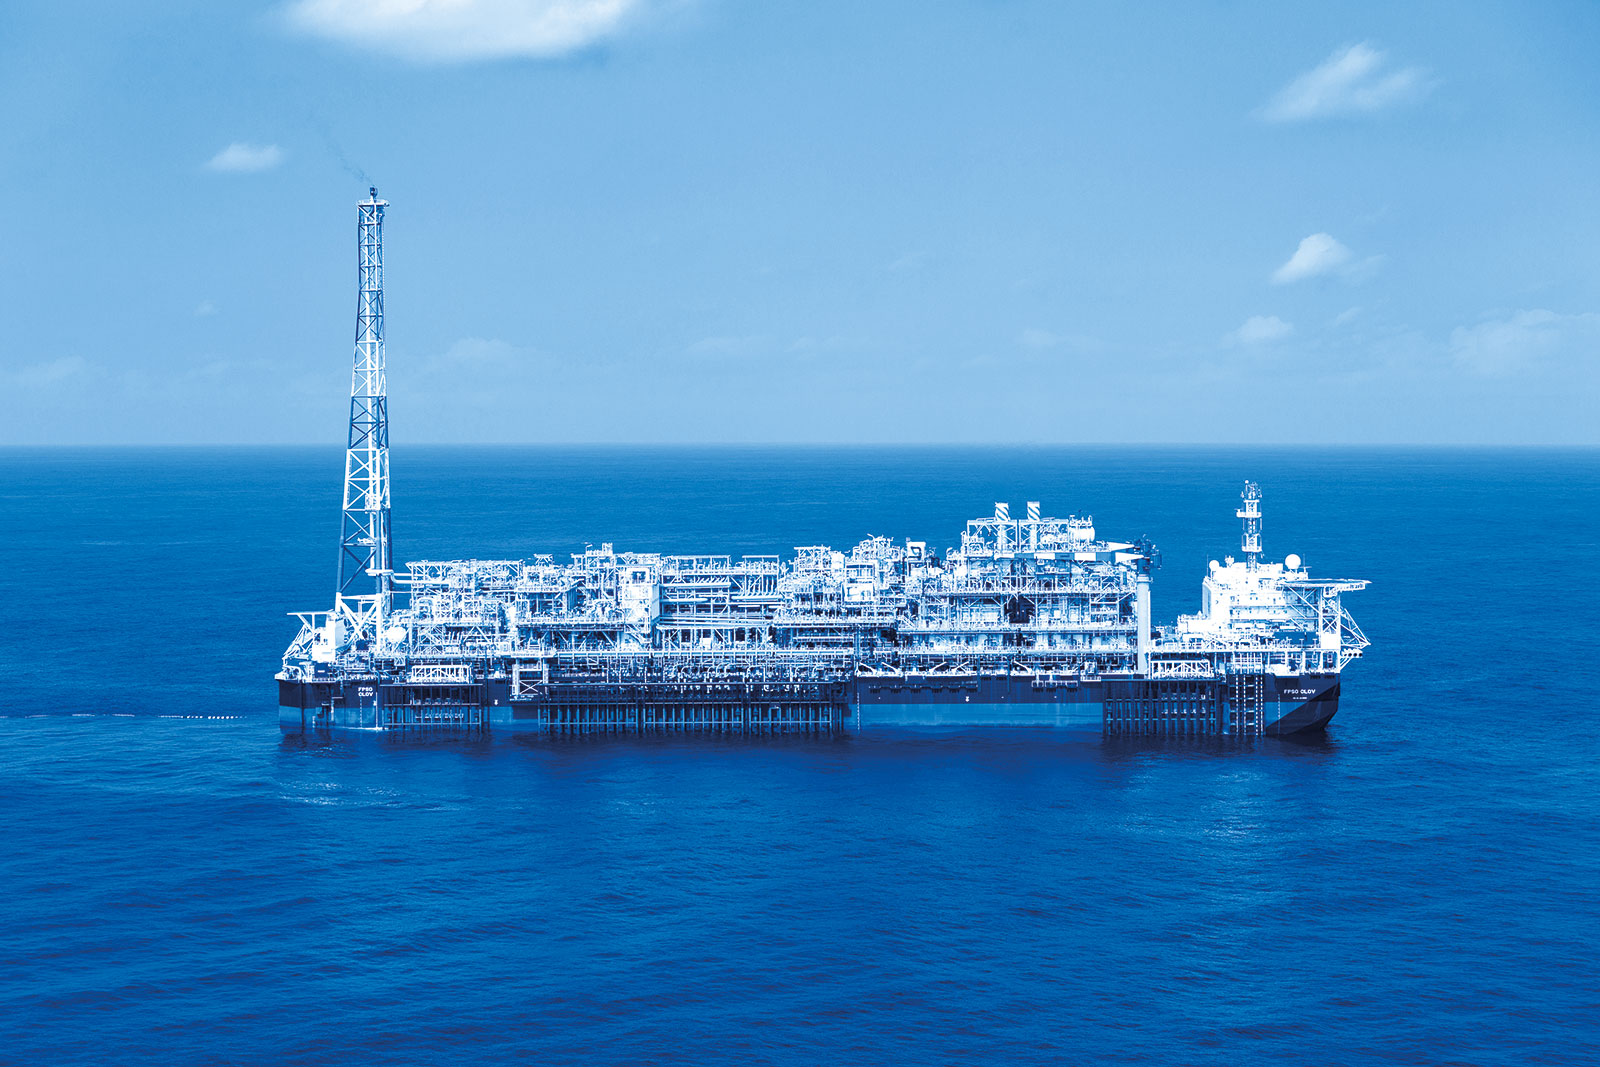 Floating production unit of the Clov field, Angola (FPSO).